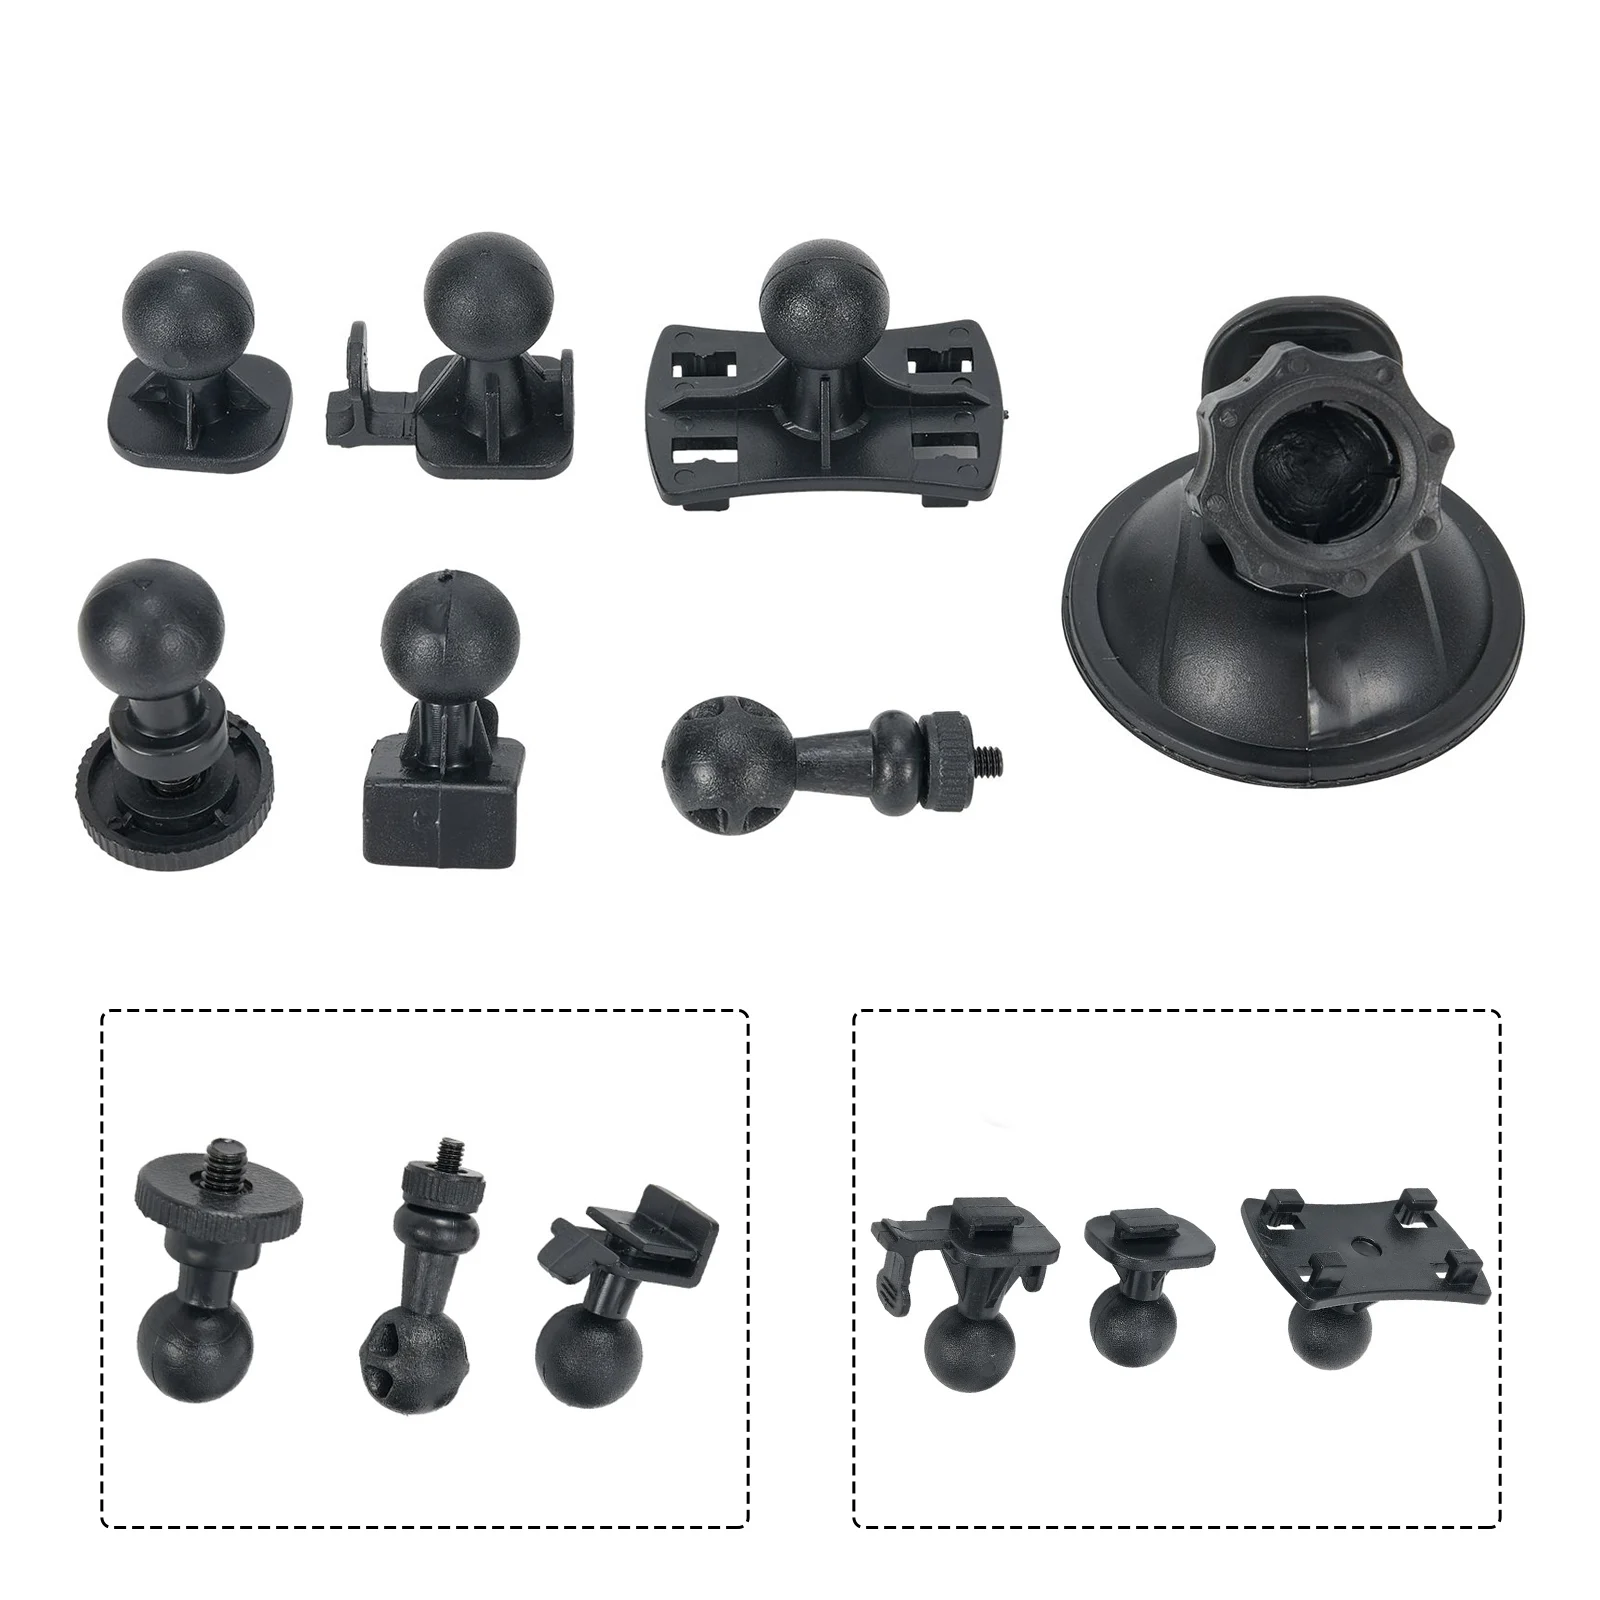 

Driving Recorder Bracket Different Joints Kit Car For Dashboard/Windshield Mount for Camcorder 6 Types Adapter